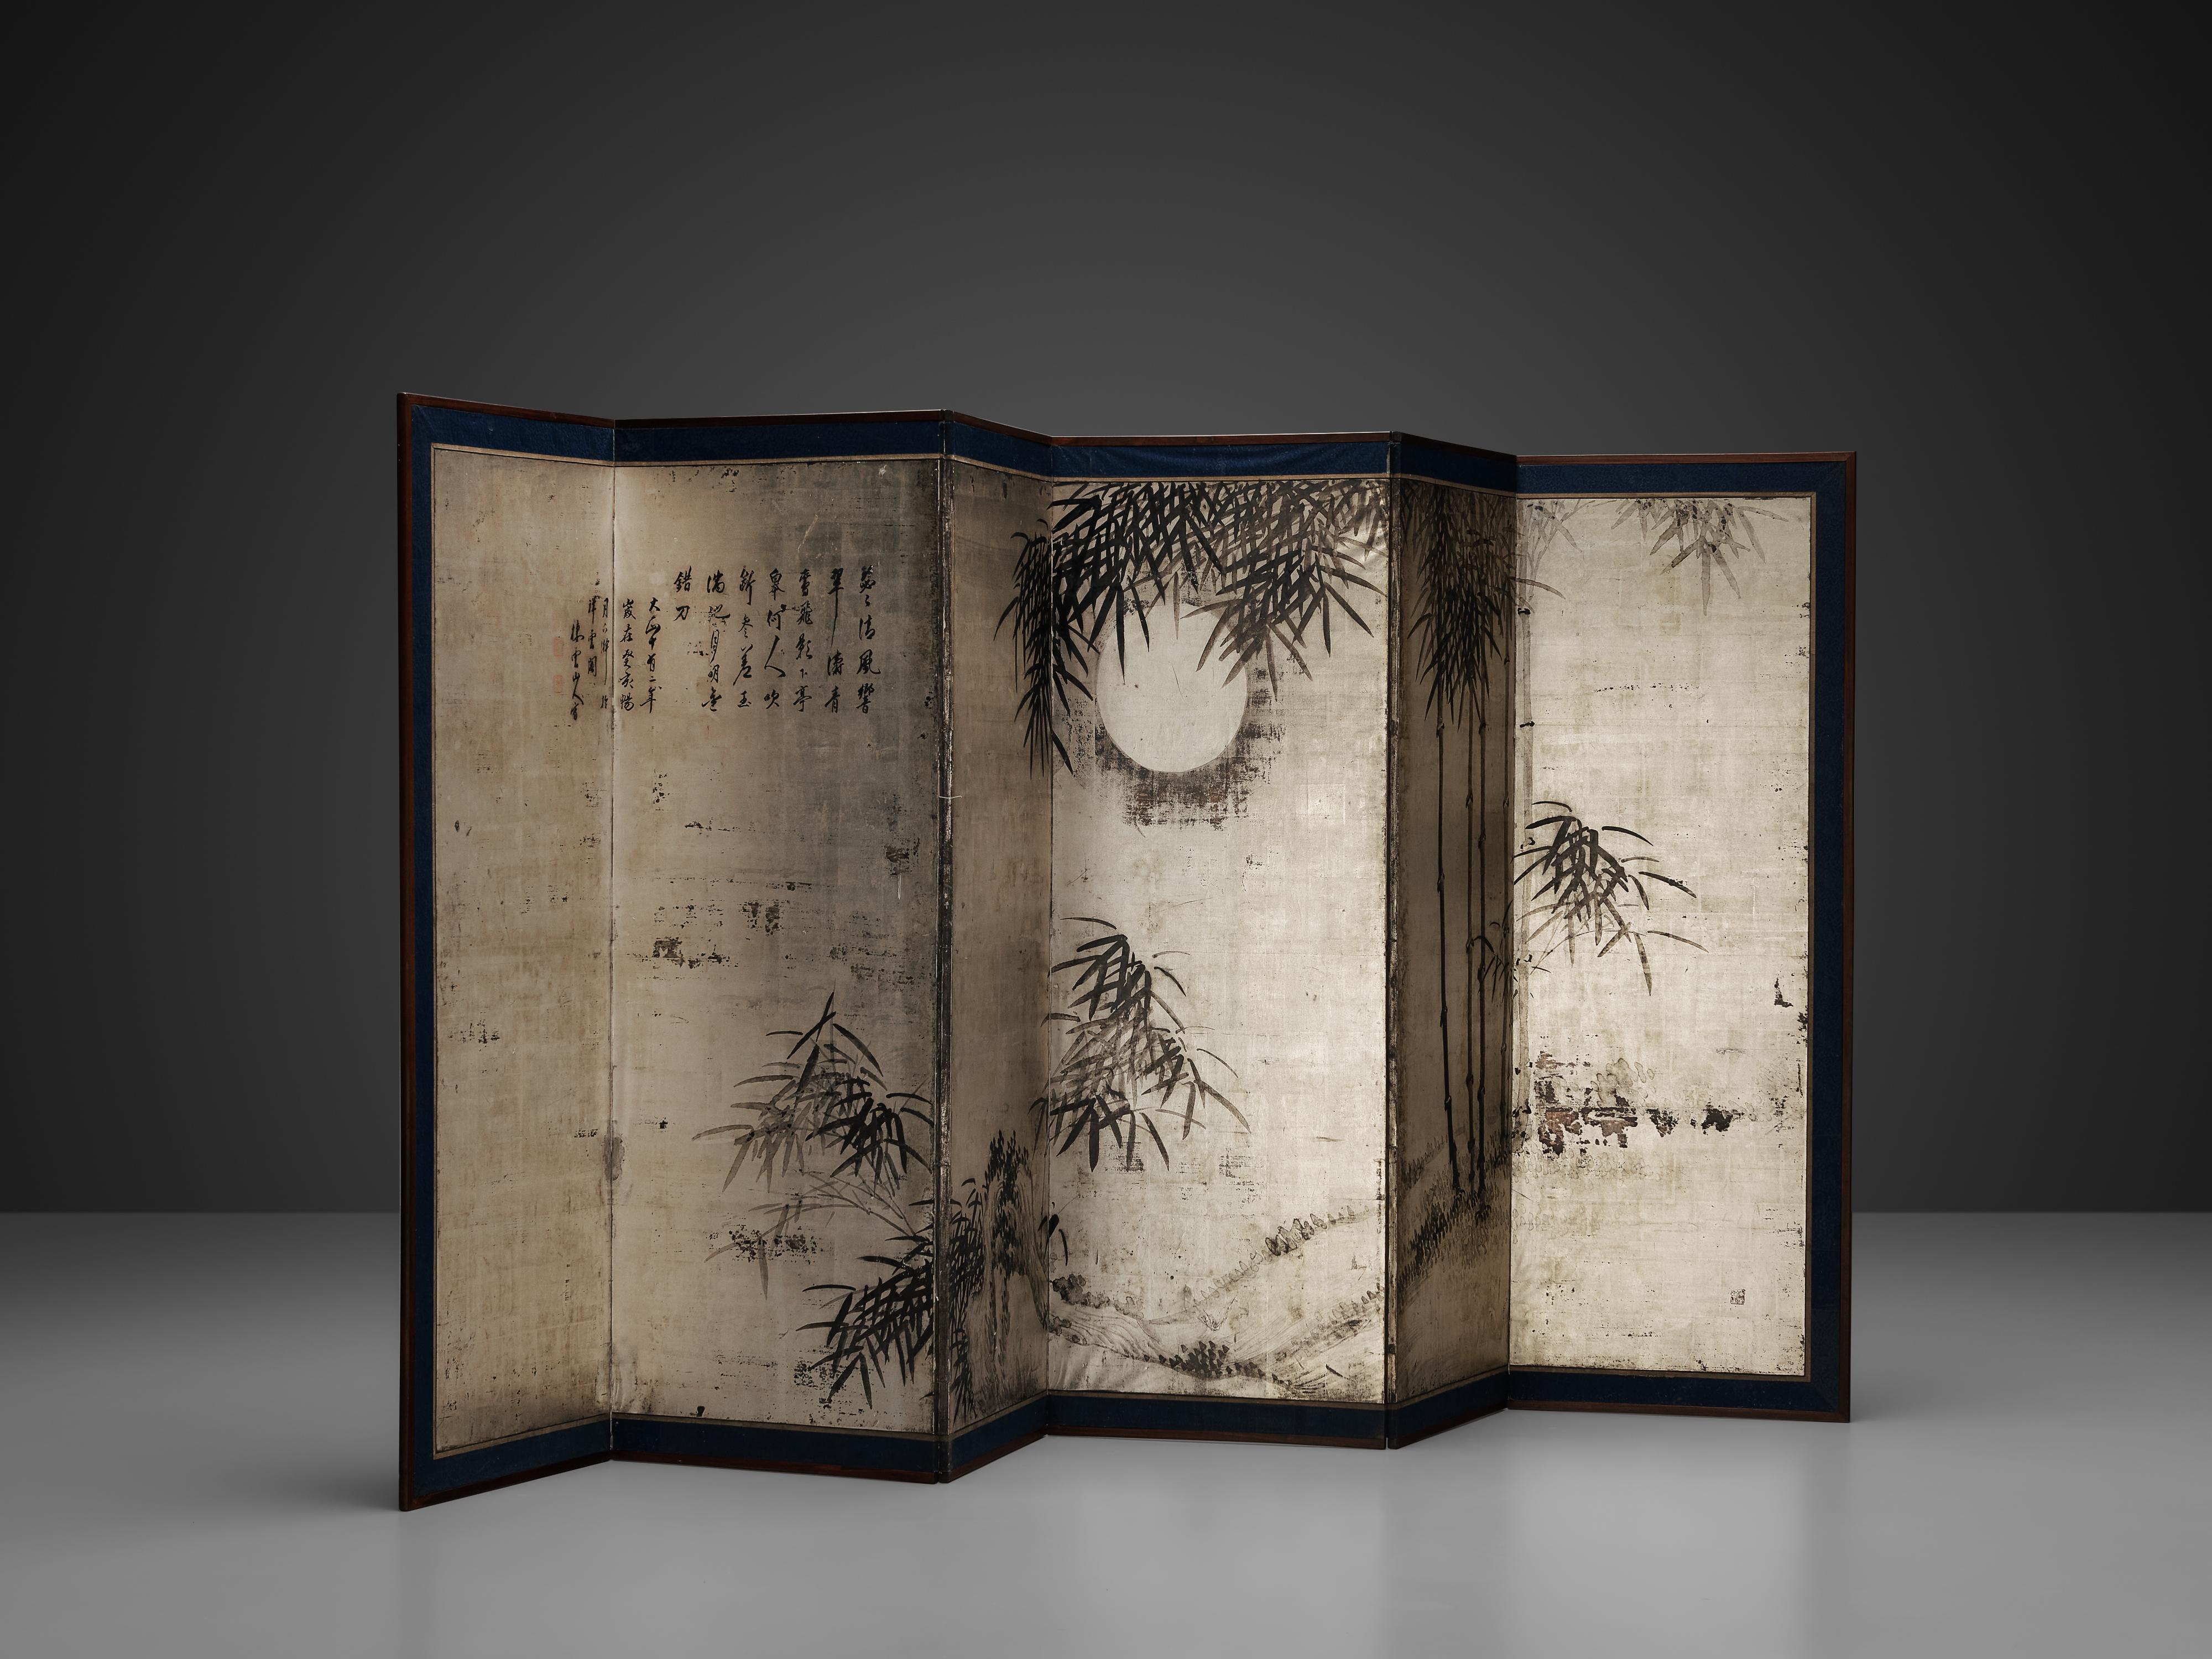 Room divider/screen, wood, parchment paper, paint, Europe, 1970s

Hand painted room divider with floral motifs and Japanese 'Shodo' characters. A nature scene with bamboo plants and a sun or moon fills the six panels. The two outer parts on the left